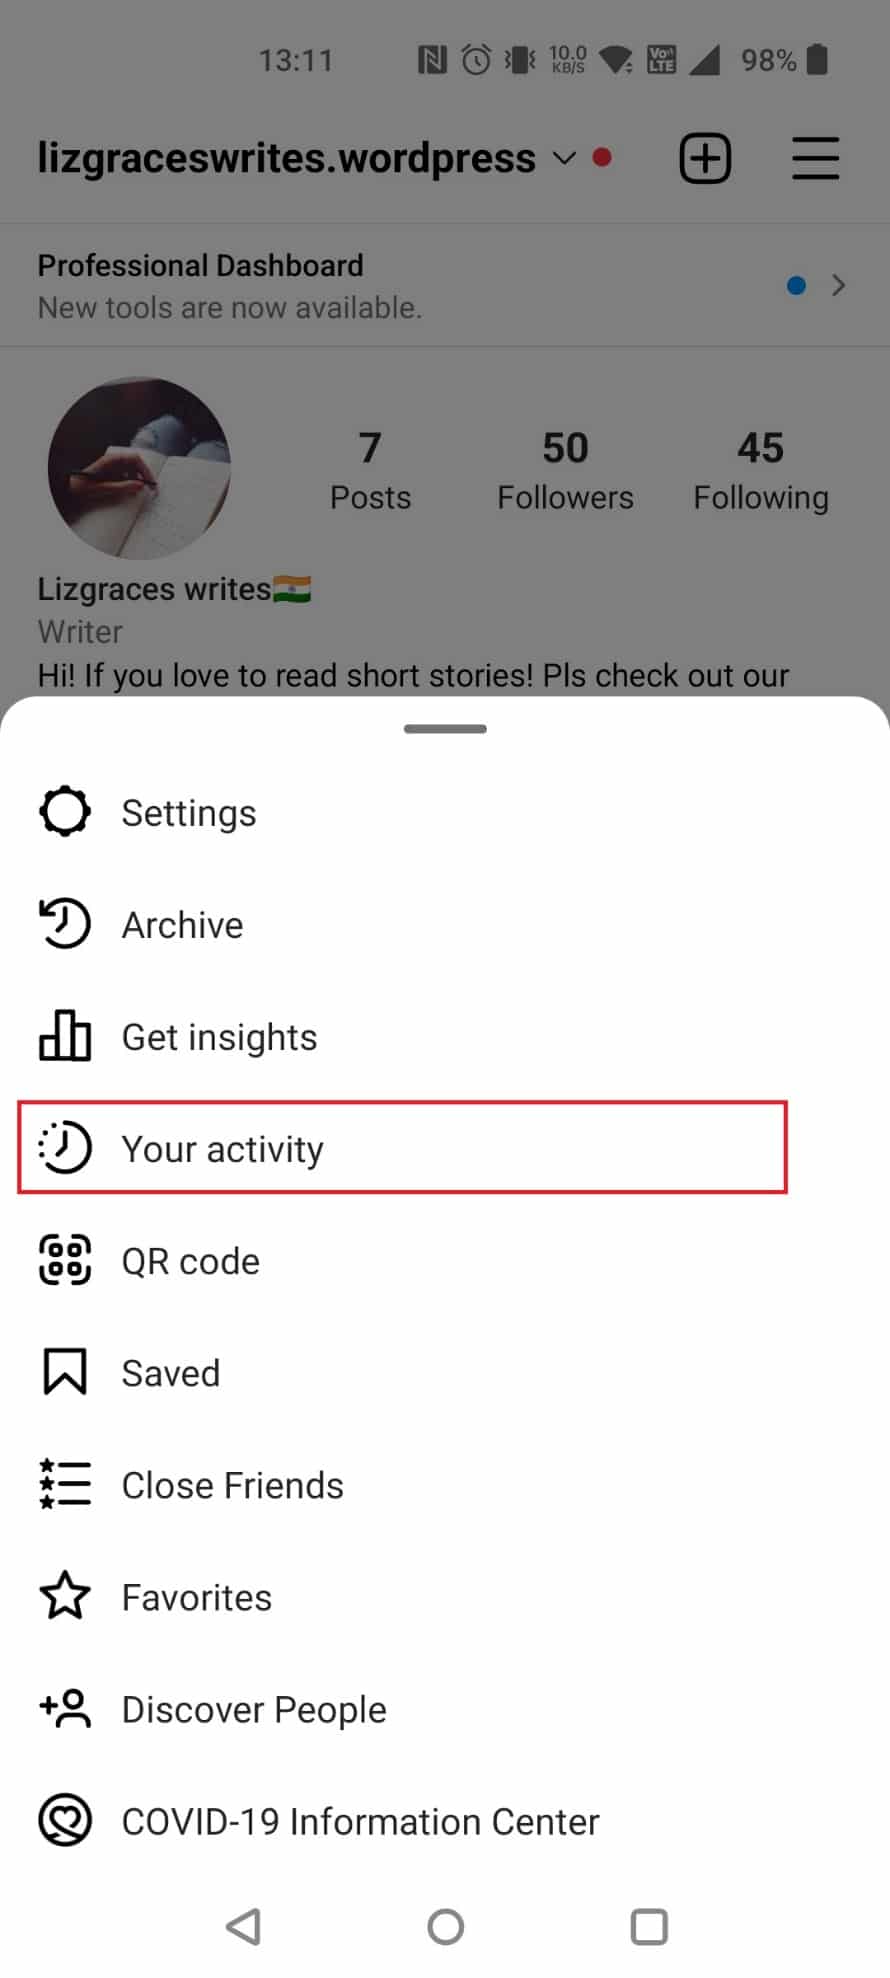 select Your activity